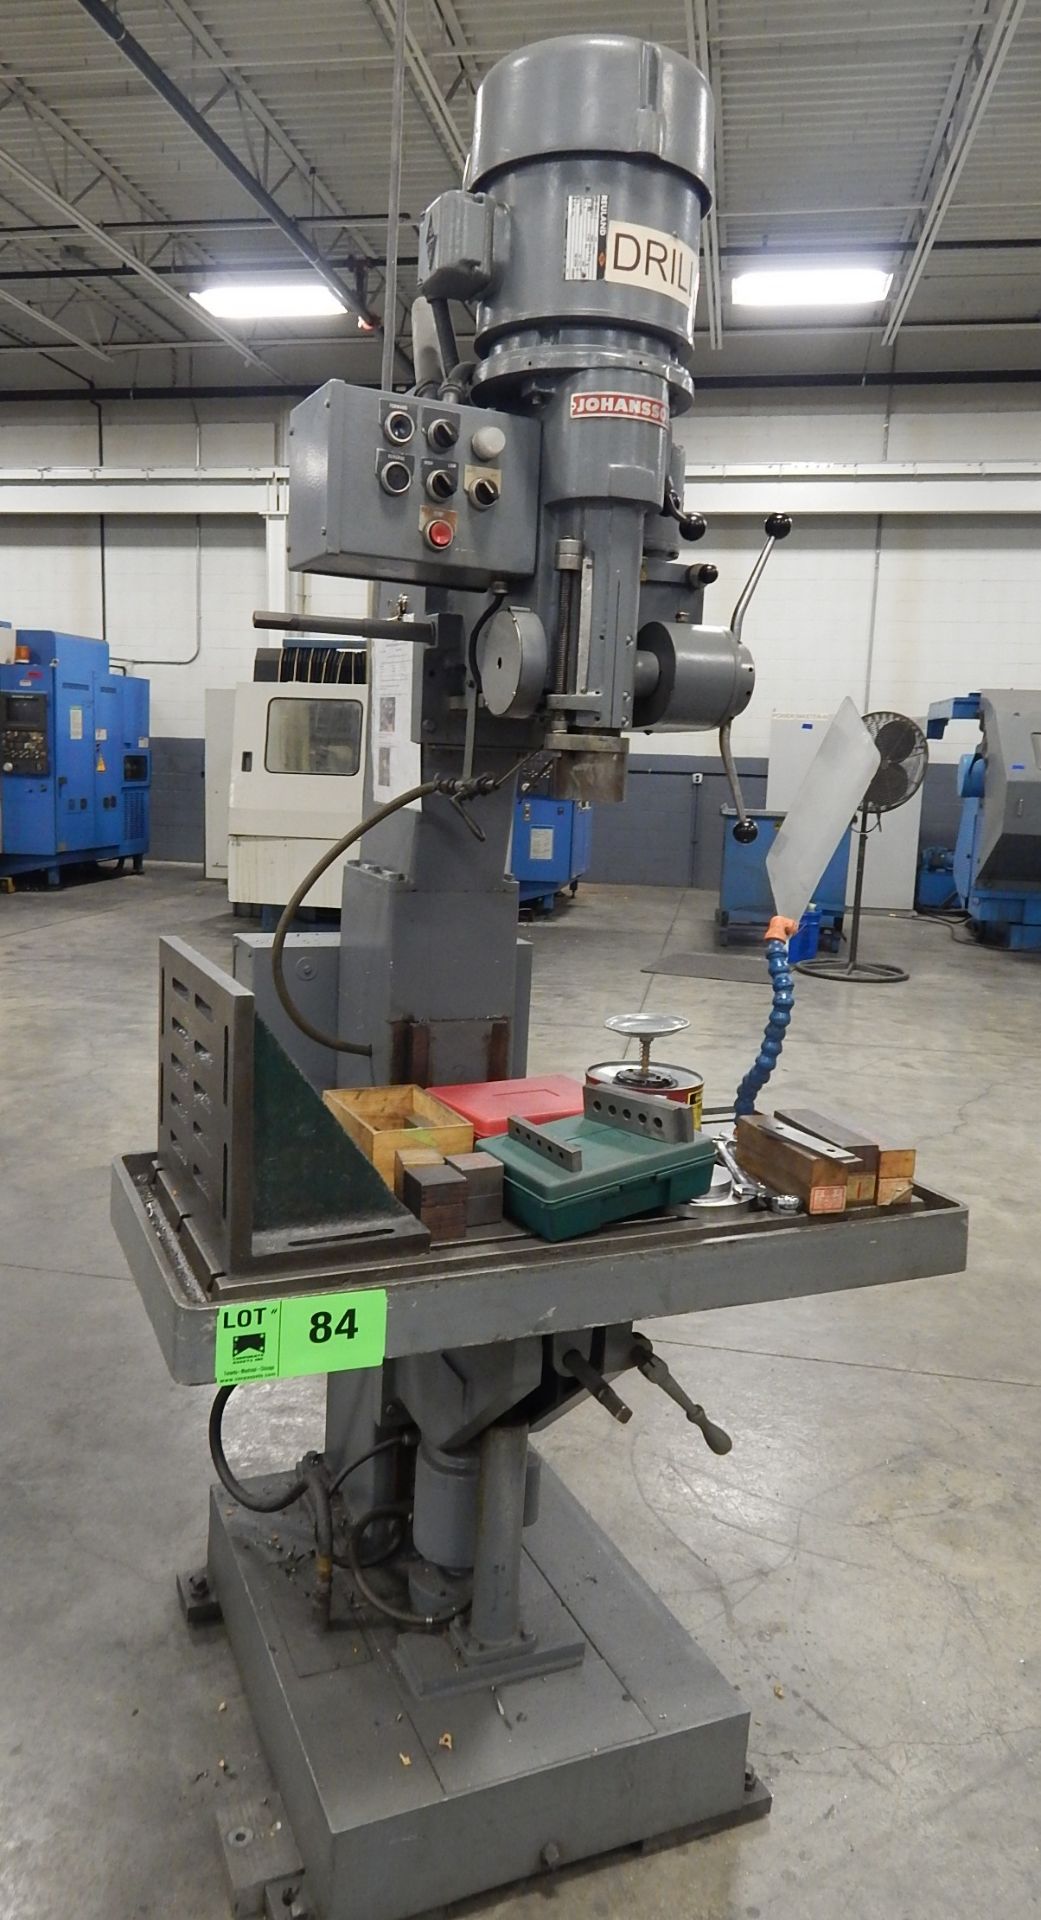 JOHANSSON DRILL PRESS WITH 36" X 18" T-SLOT TABLE, SPEEDS TO 1800RPM S/N: 3290 (CI)